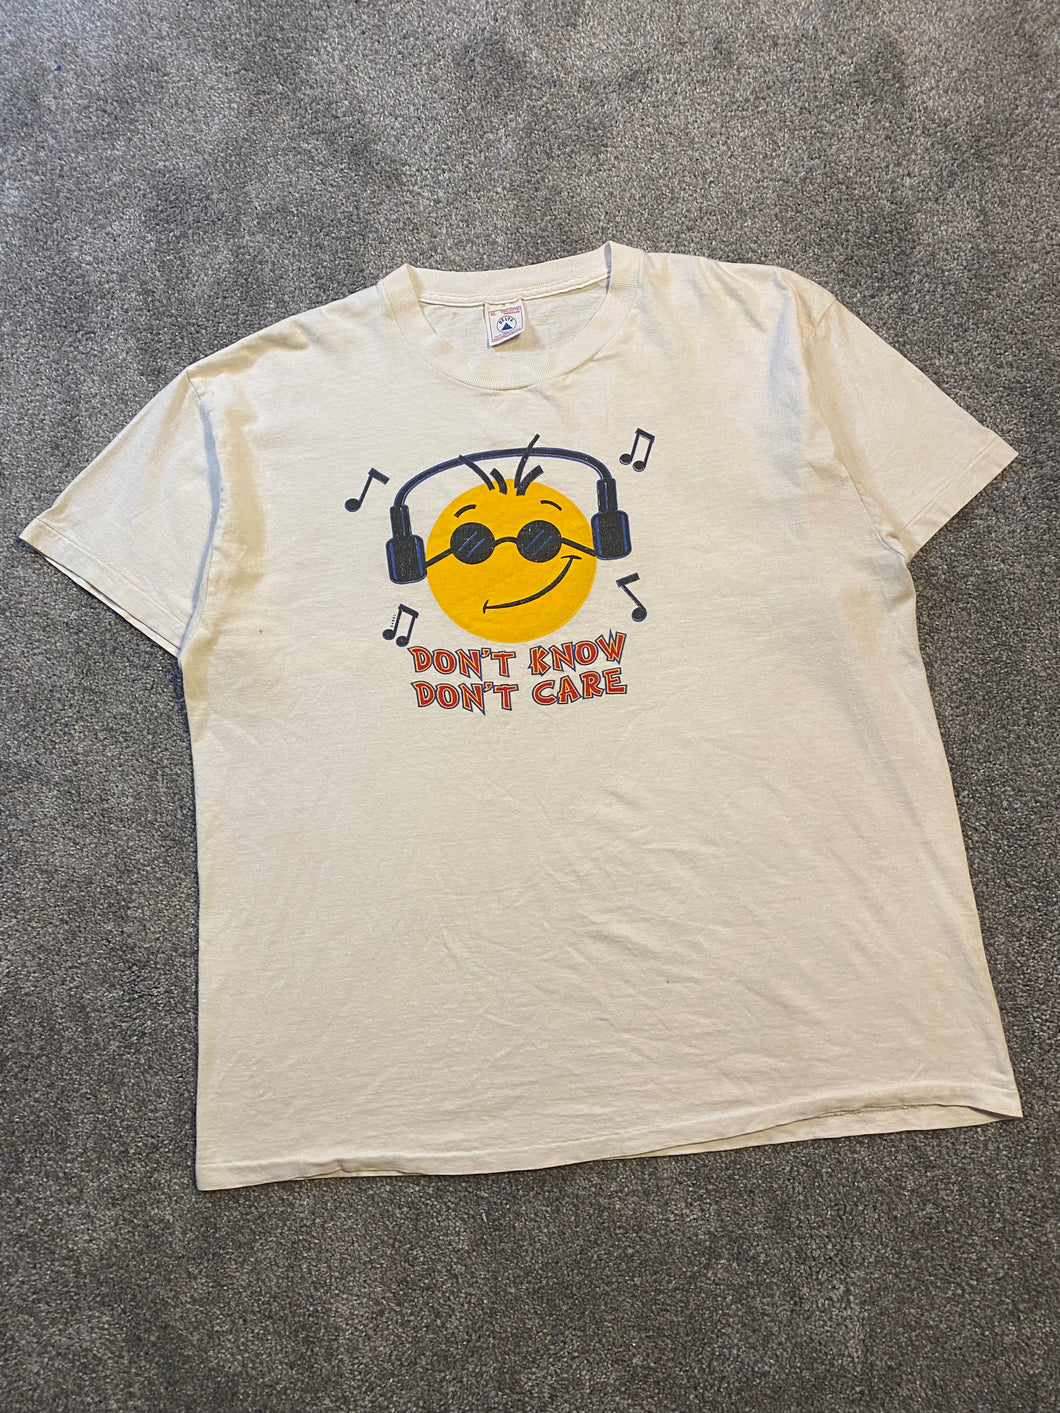 Vintage Don’t Know Don’t Care Smiley Face Tee Shirt - XL